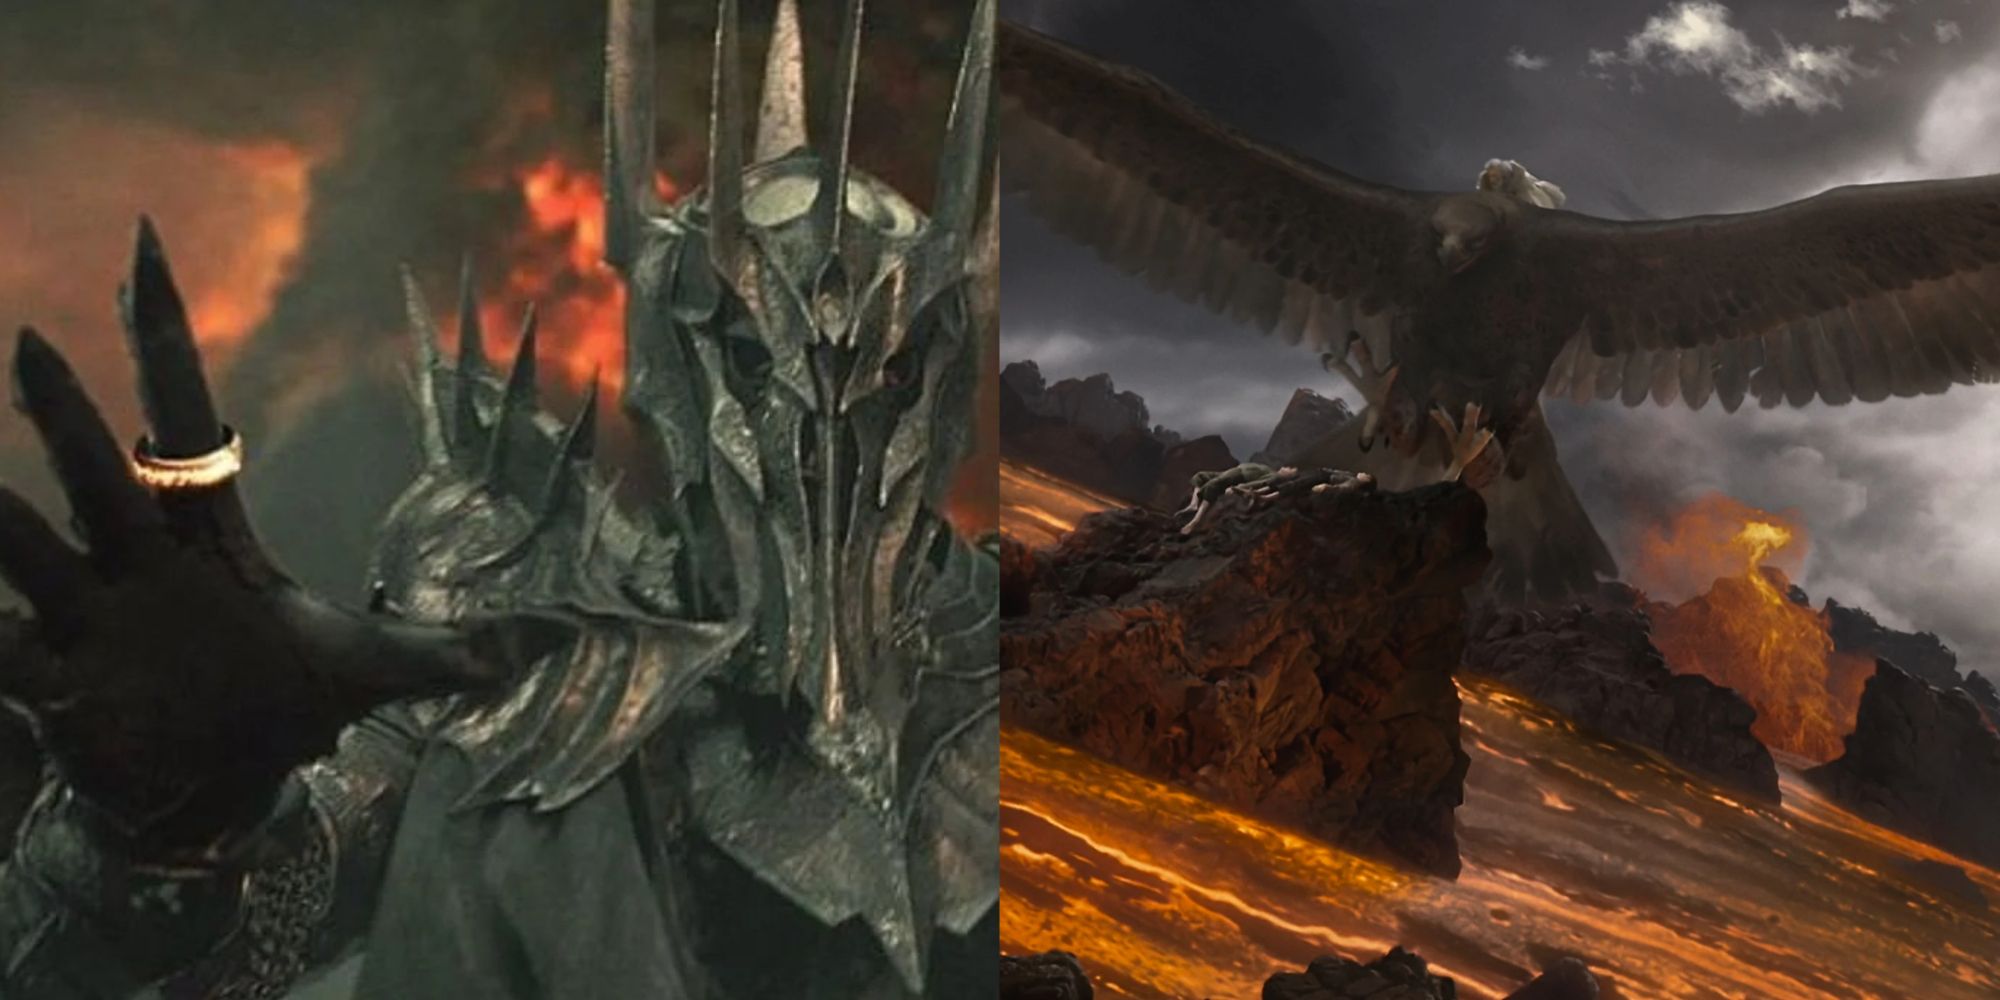 Split image of Sauron and an eagle in the Lord of the Rings movies